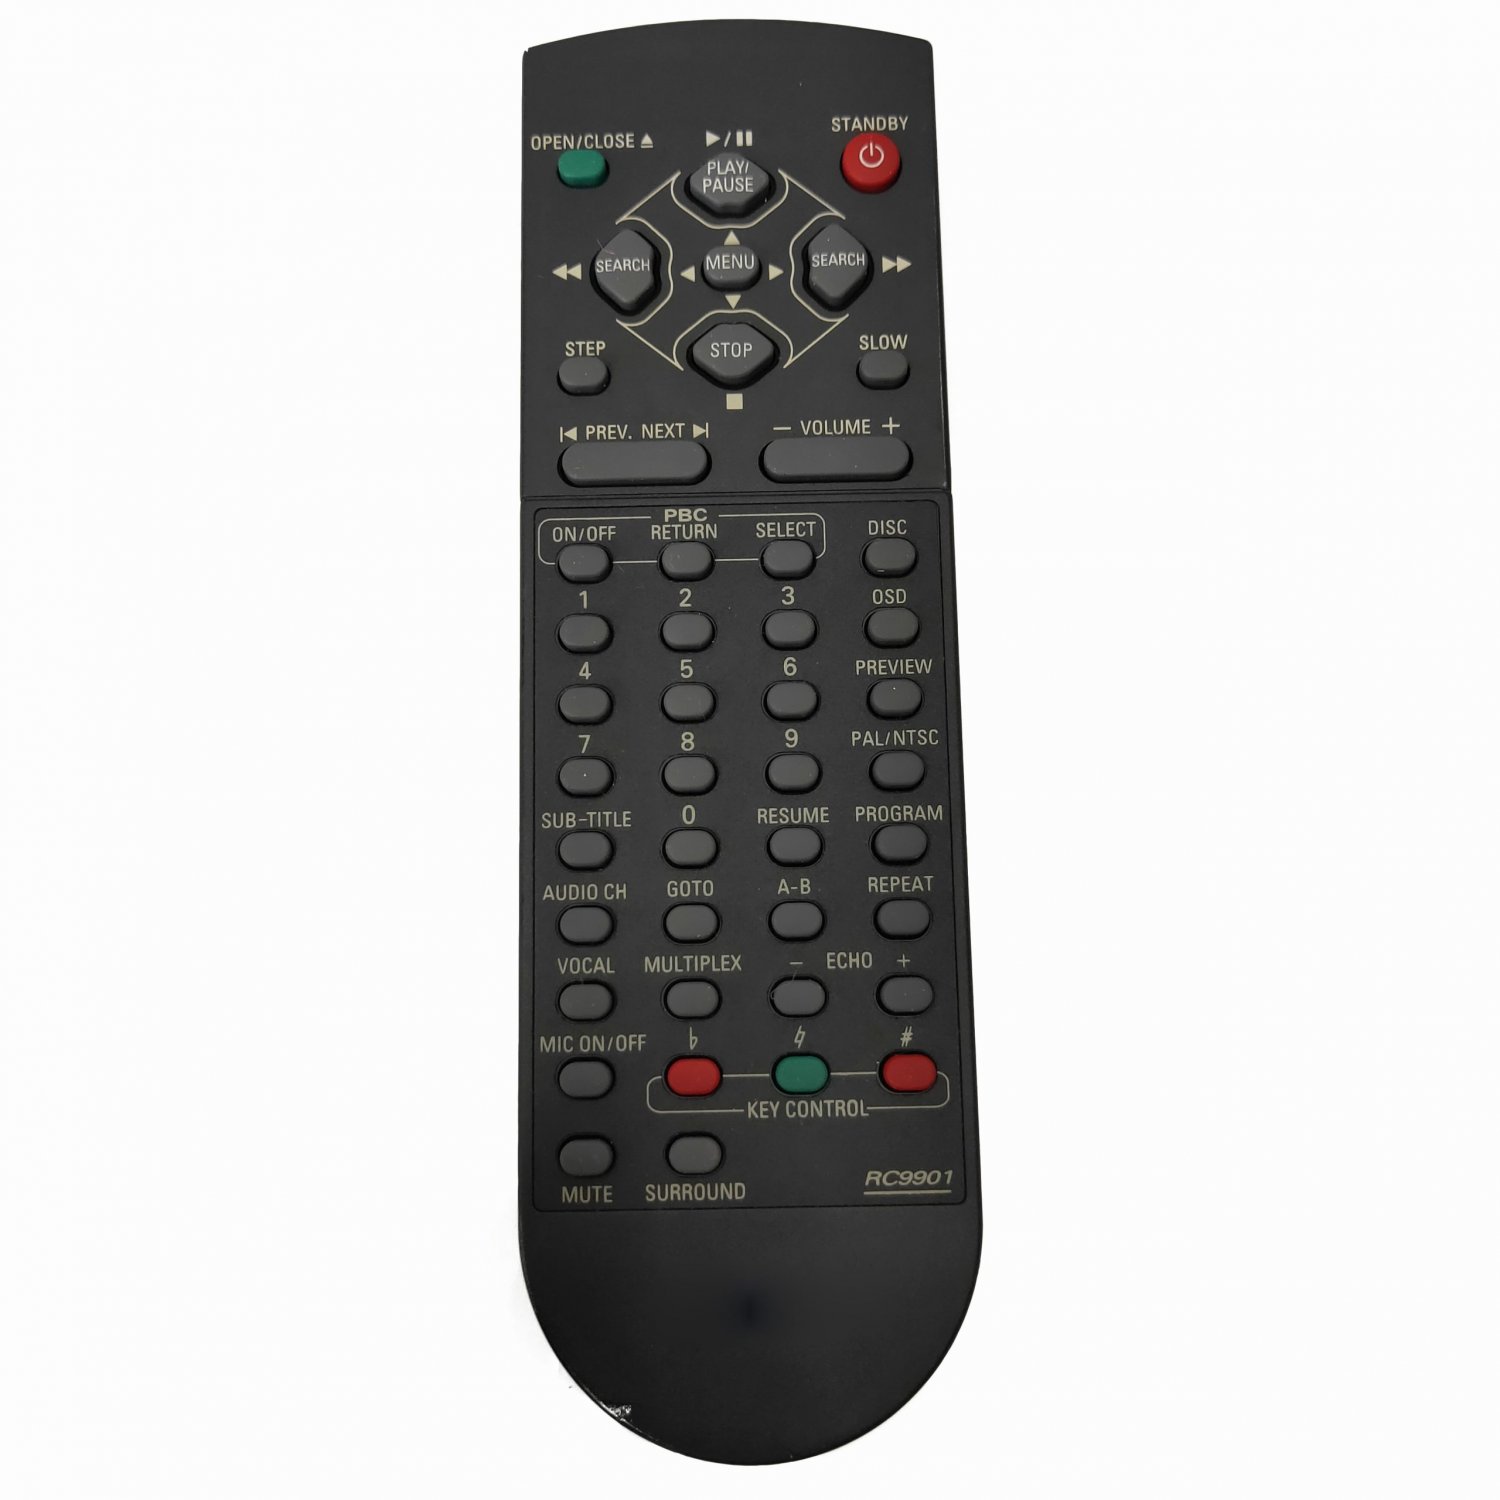 Used Original RC0618/01 Remote Control For Philips DVD Player RC9901